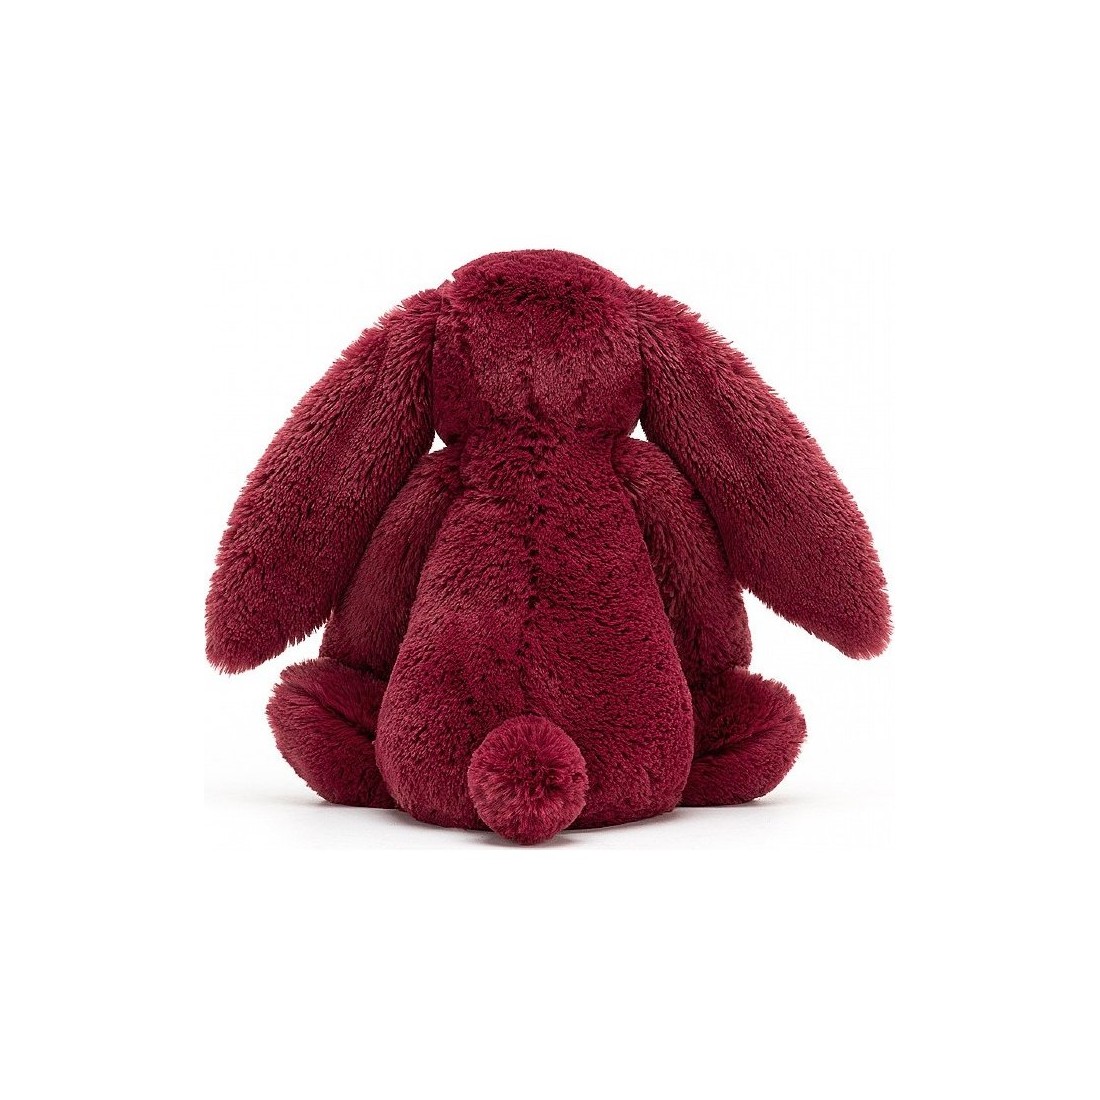 Jellycat Peluche Lapin 31cm - Sparkly Cassis